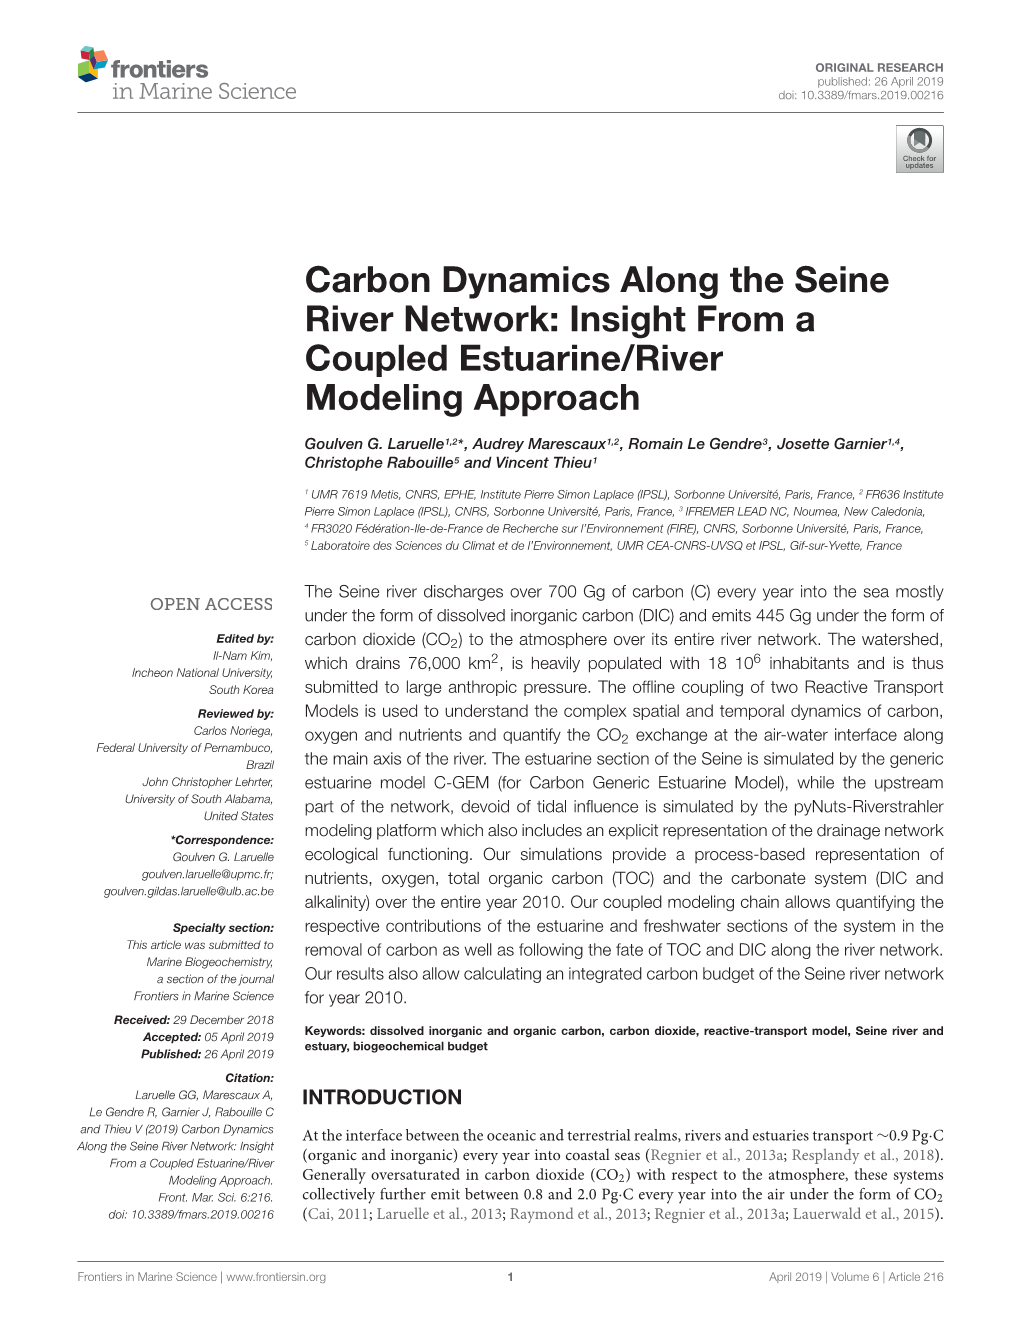 Carbon Dynamics Along the Seine River Network: Insight from a Coupled Estuarine/River Modeling Approach